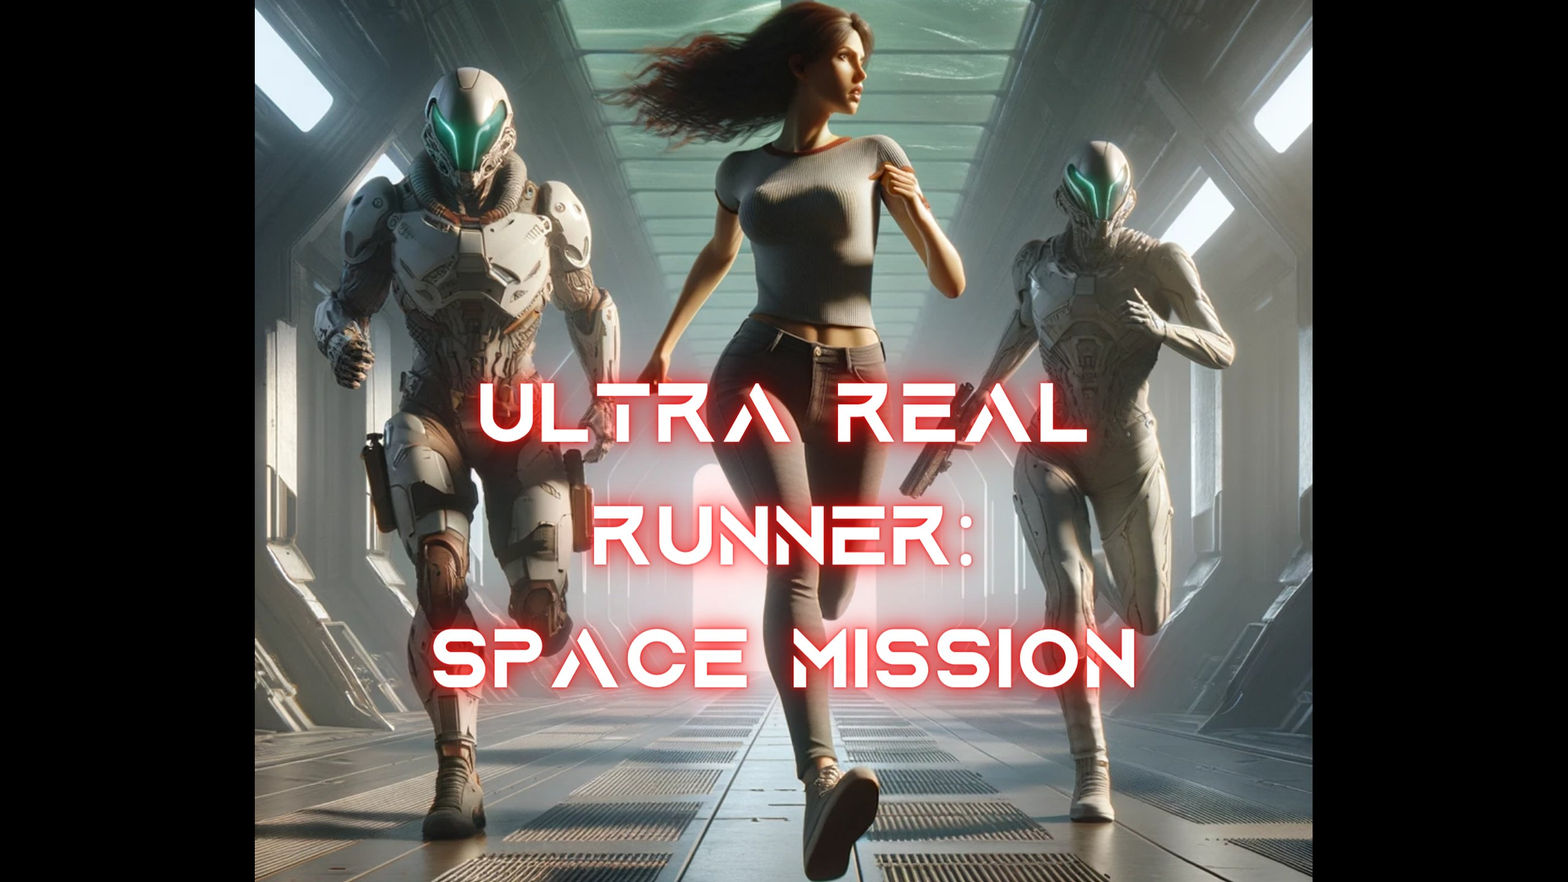 ULTRA REAL RUNNER: SPACE MISSION - RECRUIT